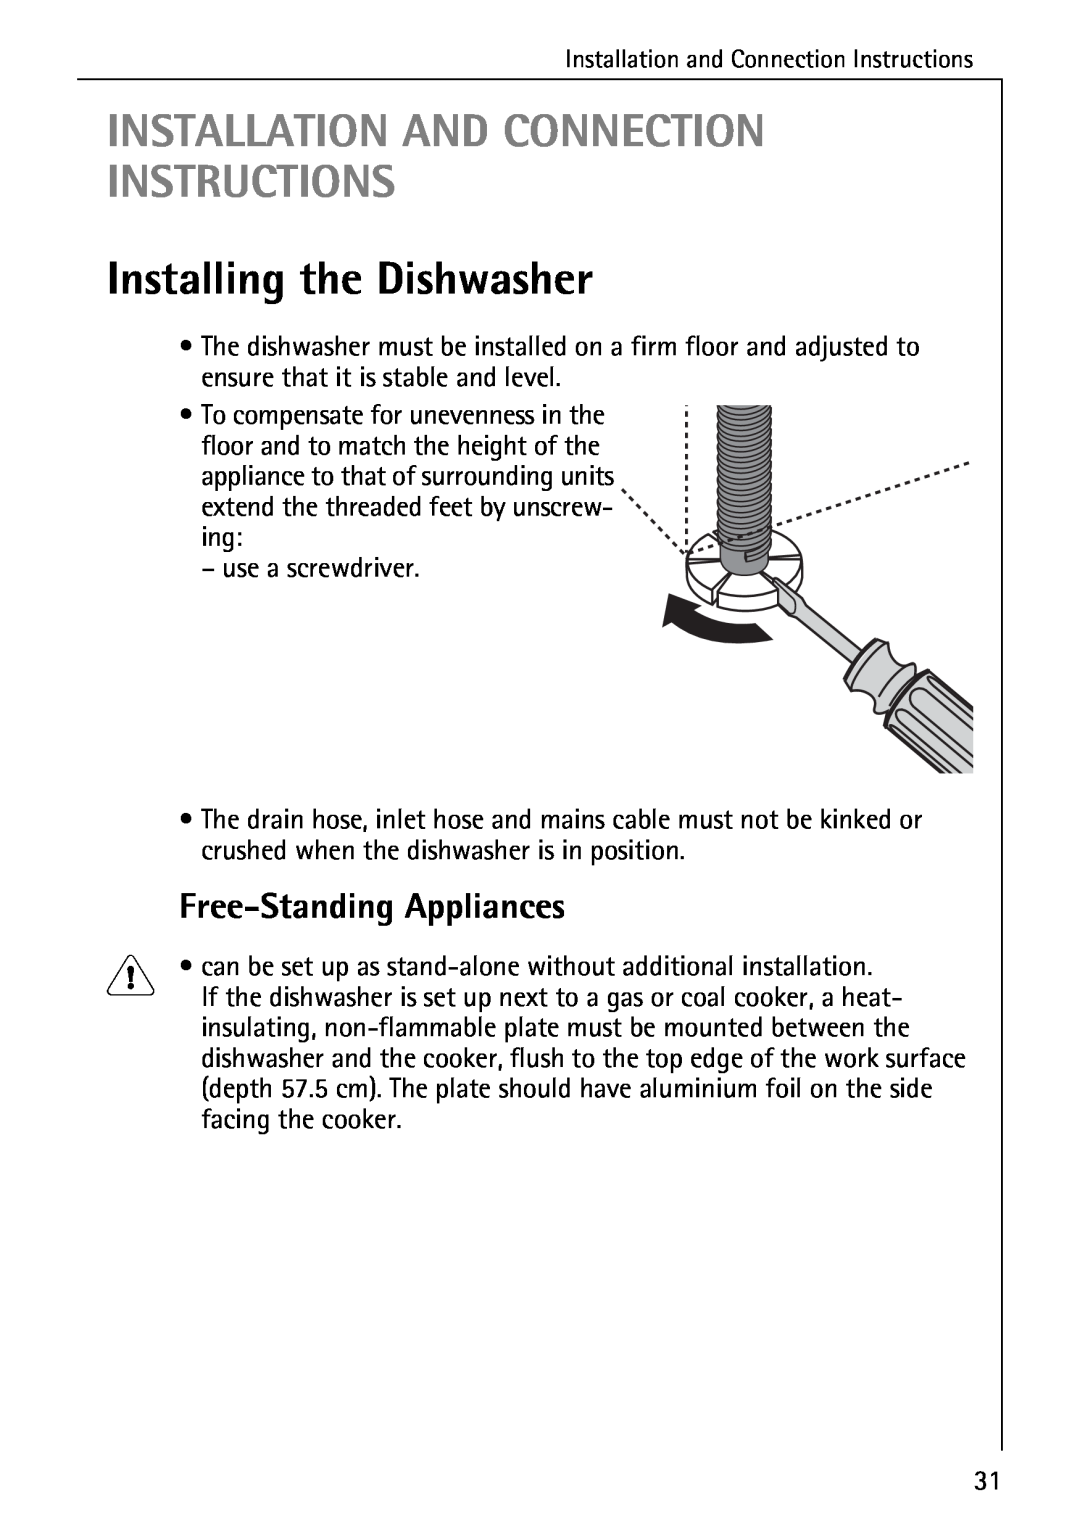 AEG 50800 manual Installation And Connection Instructions, Installing the Dishwasher, Free-StandingAppliances 